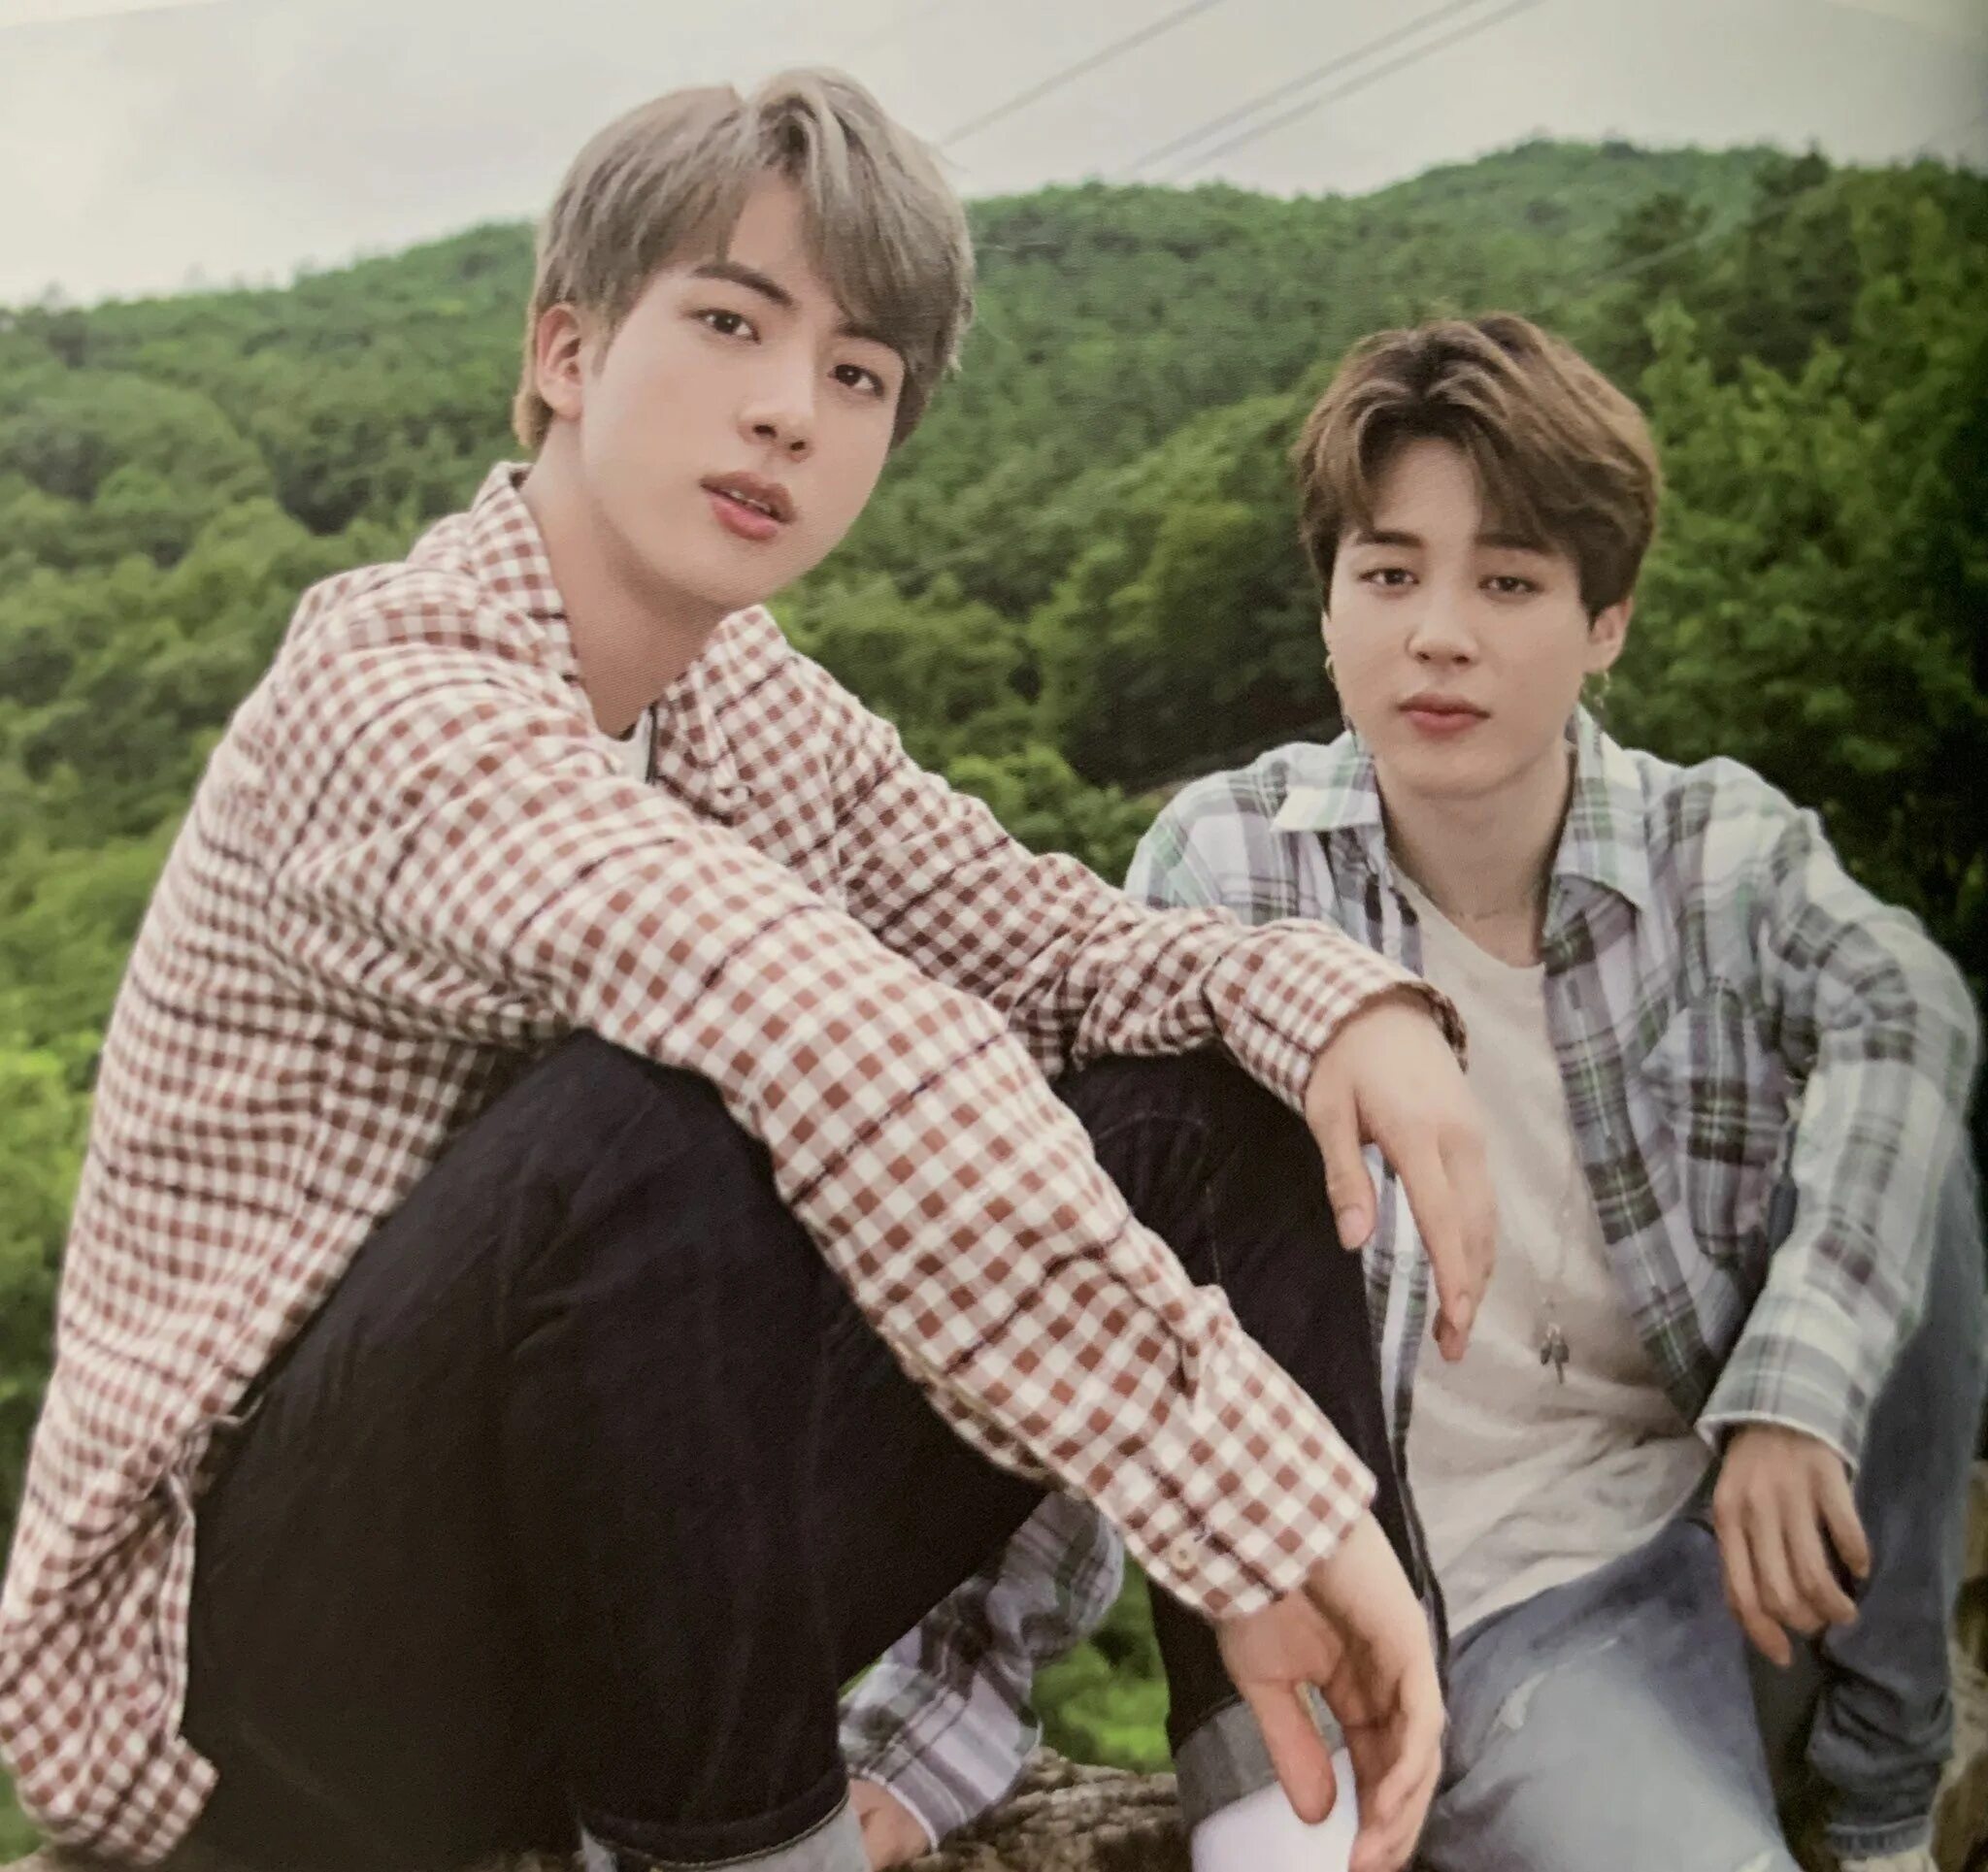 Bts scene. БТС Summer package 2019. BTS Jin and Jimin. BTS Jin Jimin Jungkook. Jin BTS Summer package 2019.